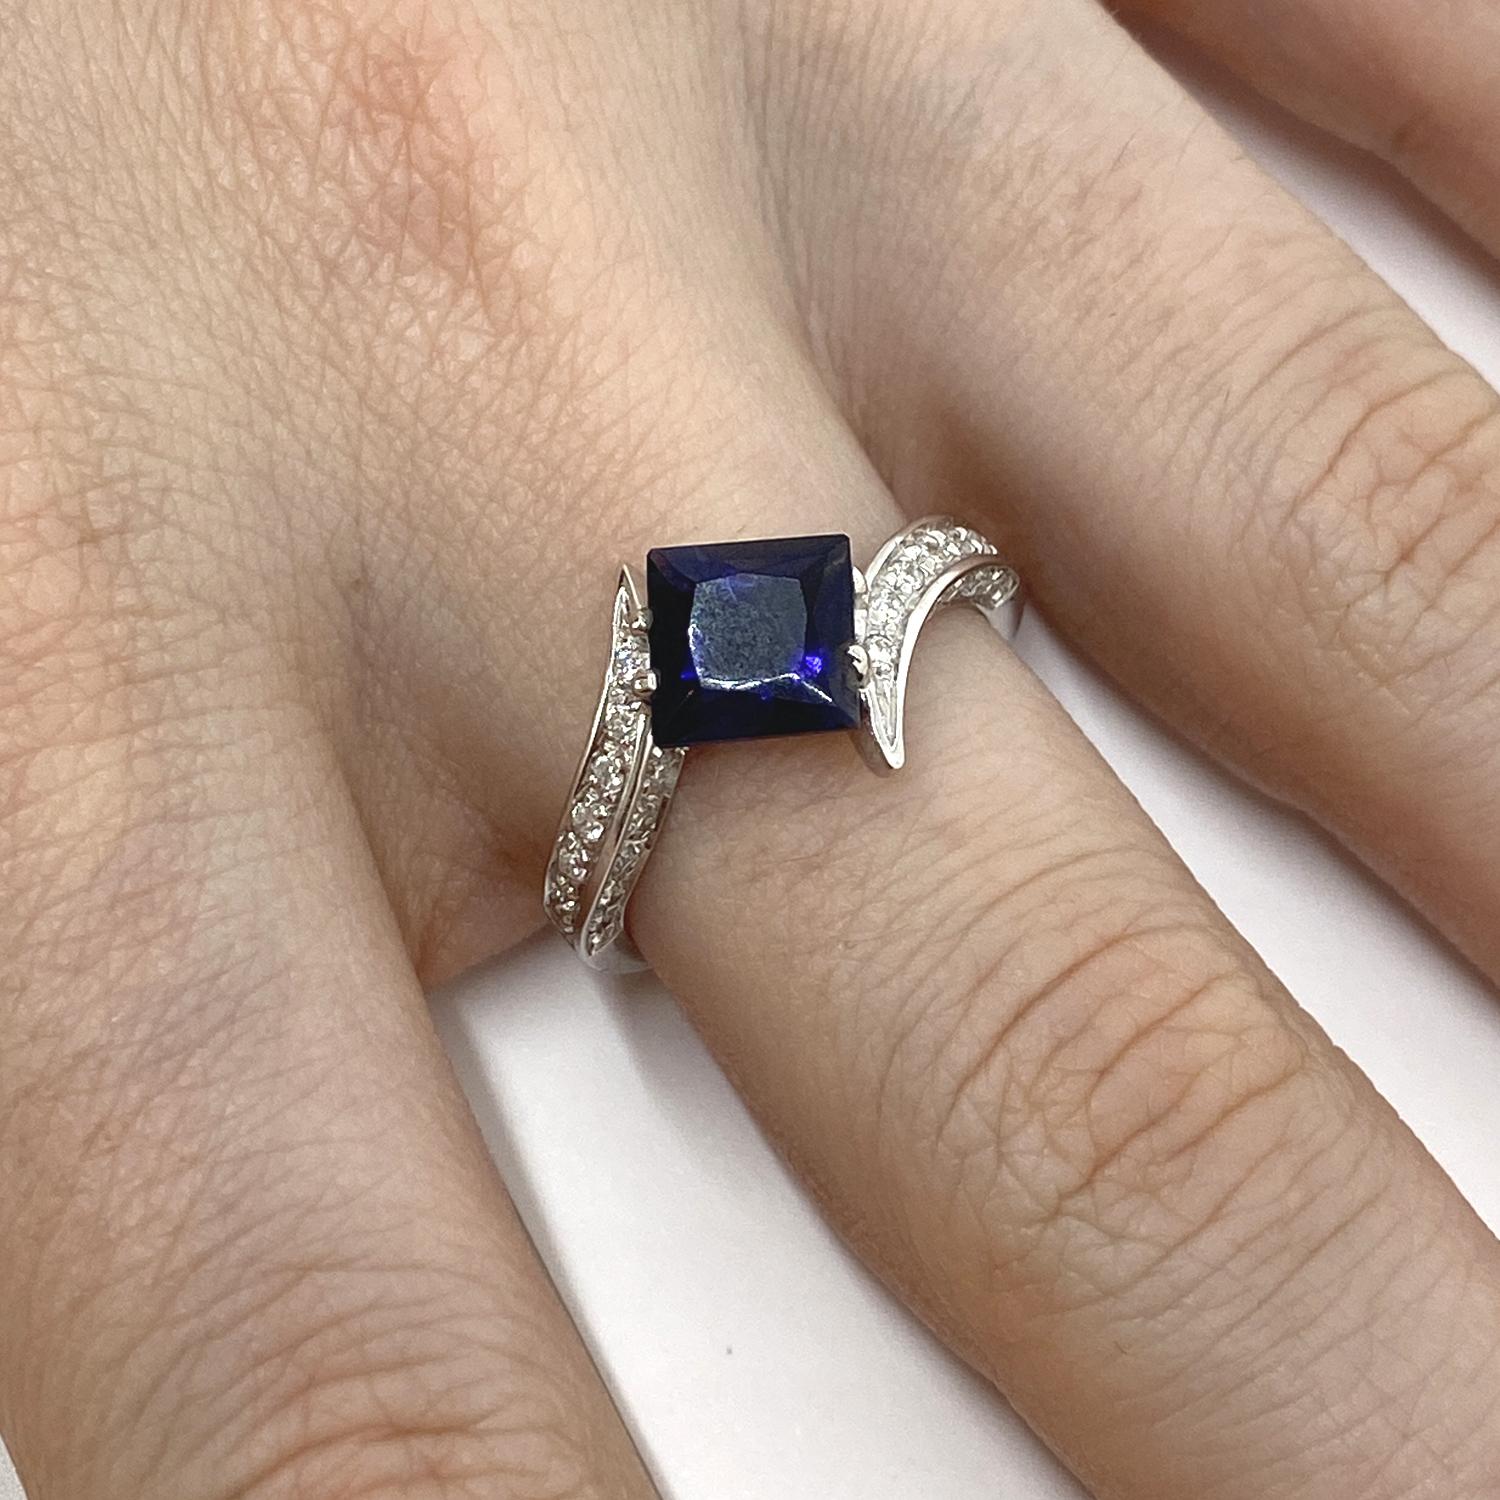 Ring made of 18kt white gold with natural Carré - cut iolite for ct . 1.80 and natural white brilliant-cut diamonds for ct.0.40
-------------------------------------------------

Important Note : In order to speed up the publishing process of our